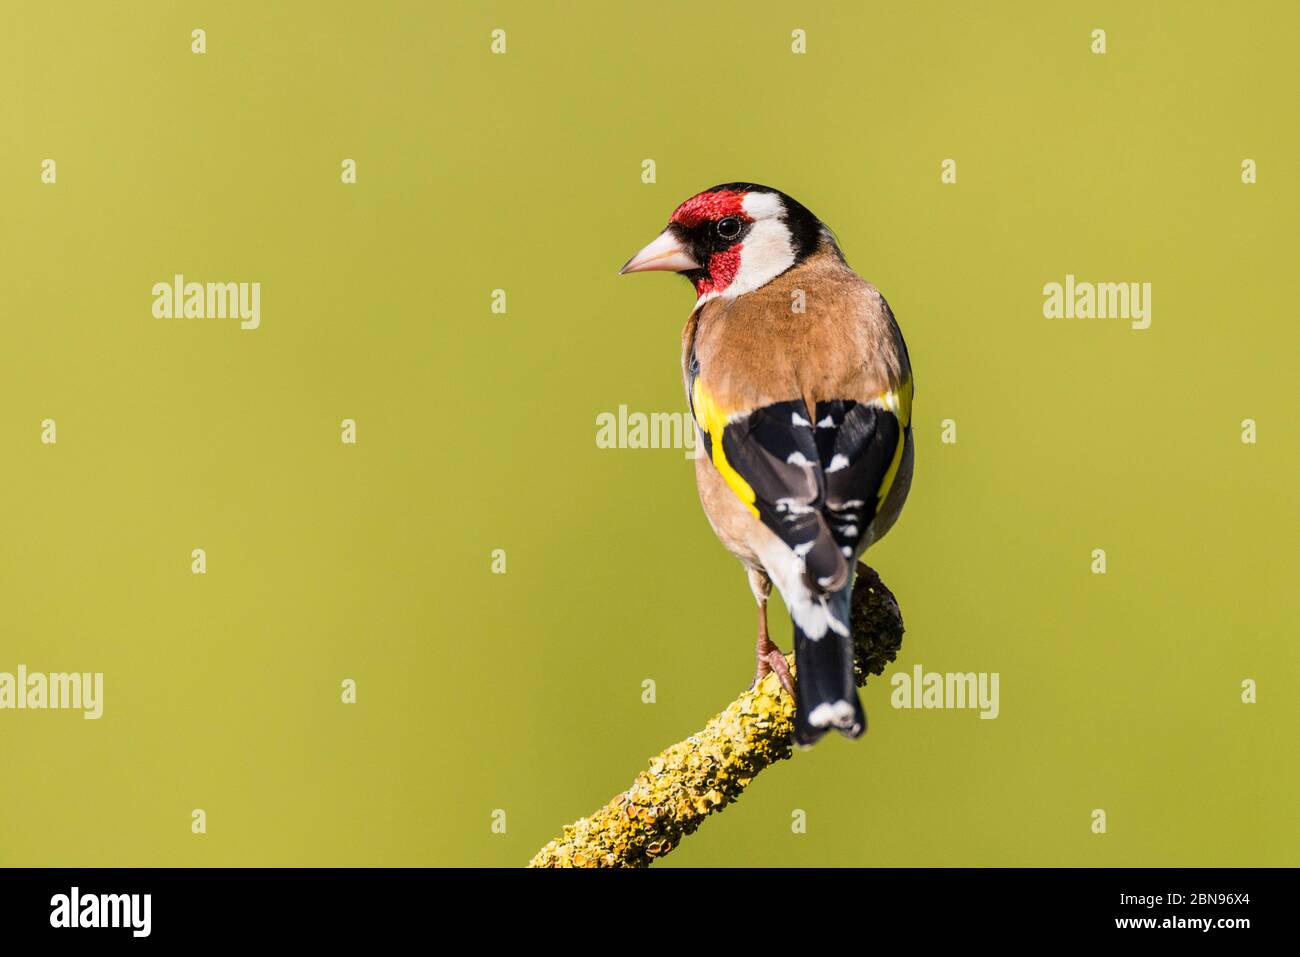 A Goldfinch (Carduelis carduelis) in the Uk Stock Photo